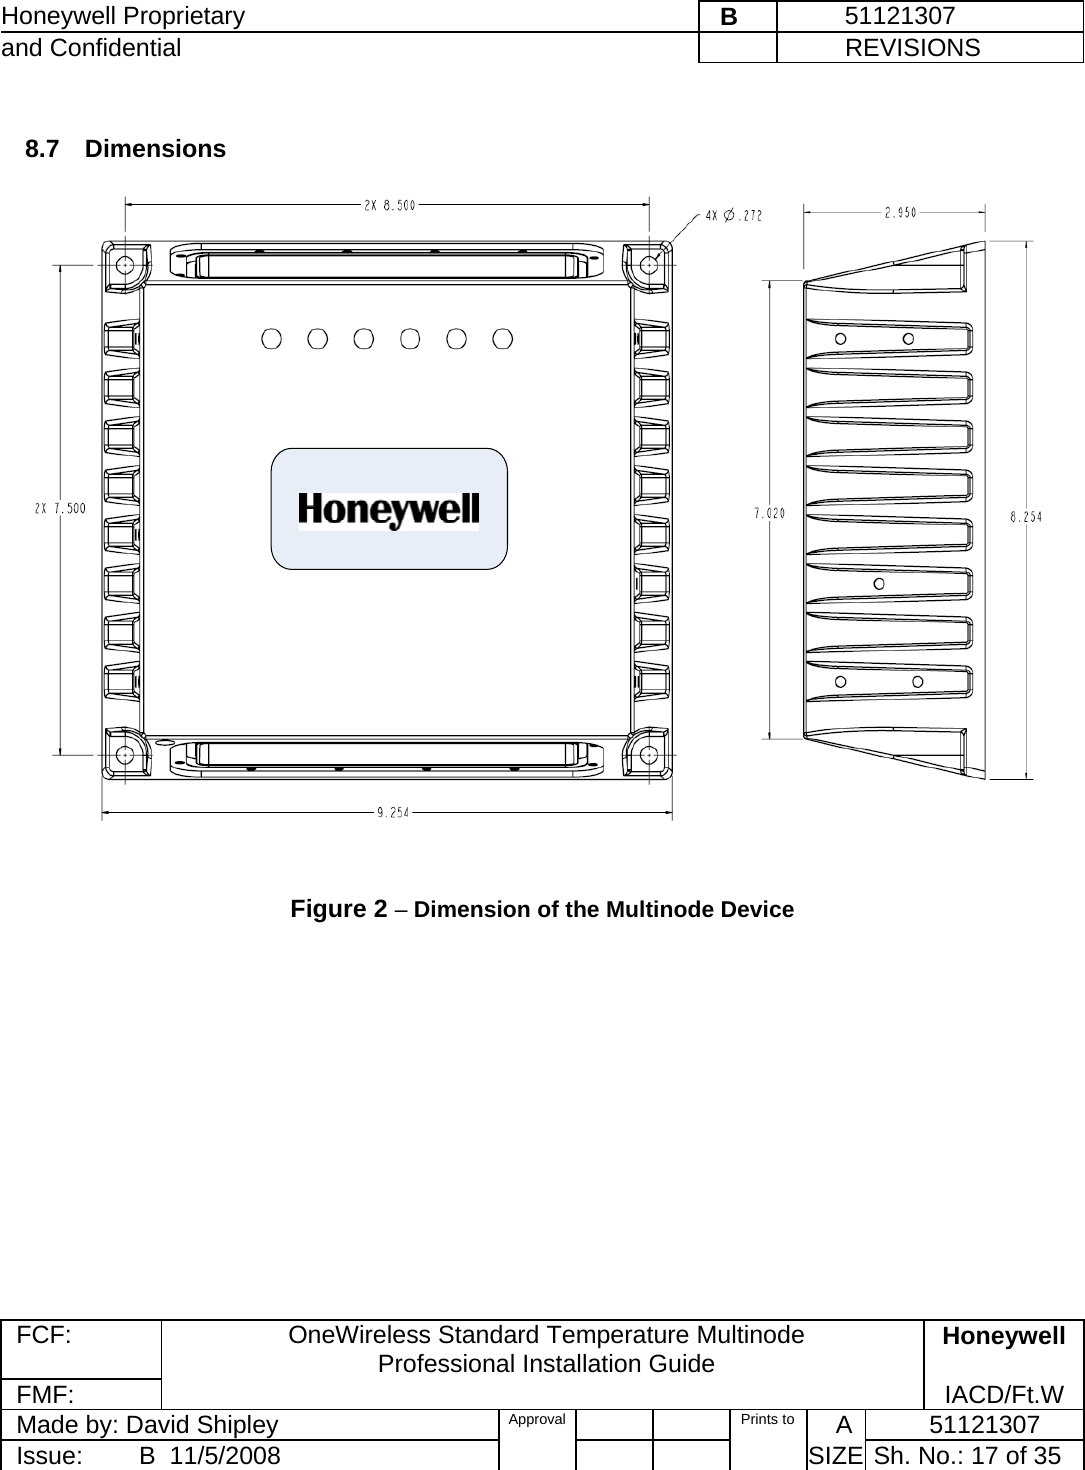 Honeywell Proprietary    B         51121307 and Confidential             REVISIONS  FCF: OneWireless Standard Temperature Multinode  Professional Installation Guide  Honeywell FMF:               IACD/Ft.W Made by: David Shipley  Approval   Prints to     A           51121307 Issue:        B  11/5/2008          SIZE  Sh. No.: 17 of 35   8.7 Dimensions    Figure 2 – Dimension of the Multinode Device   